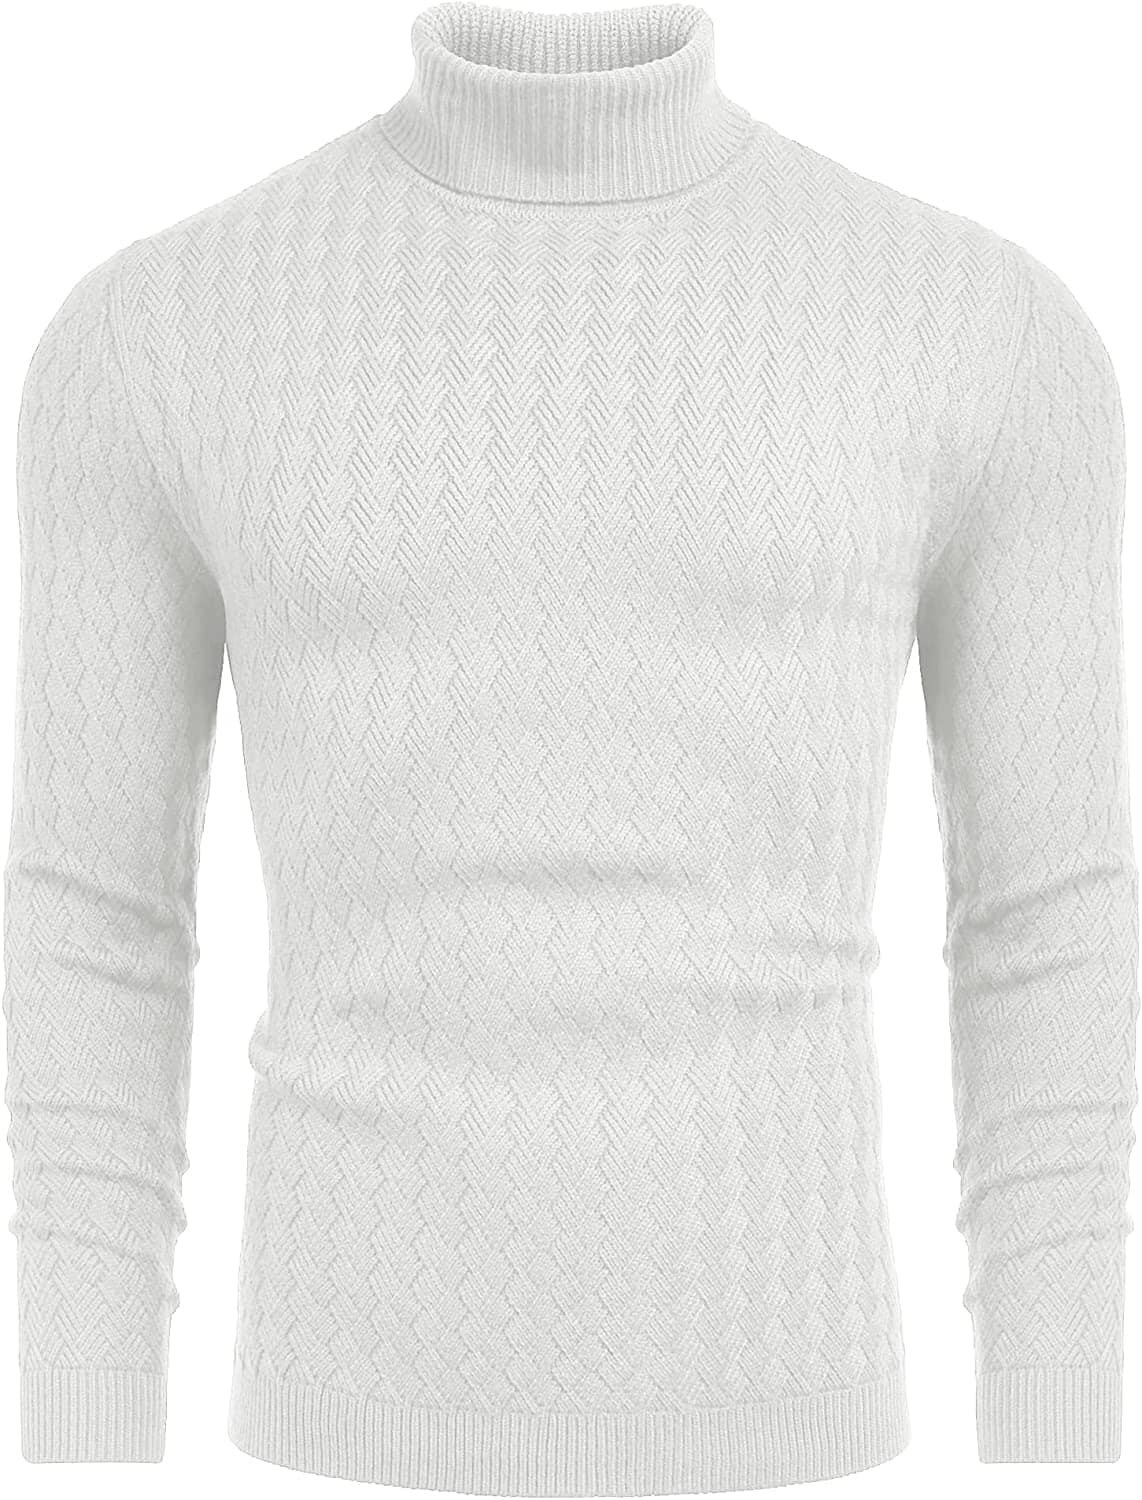 Turtleneck Patterned Knitted Pullover Sweater (US Only) Sweaters COOFANDY Store White S 